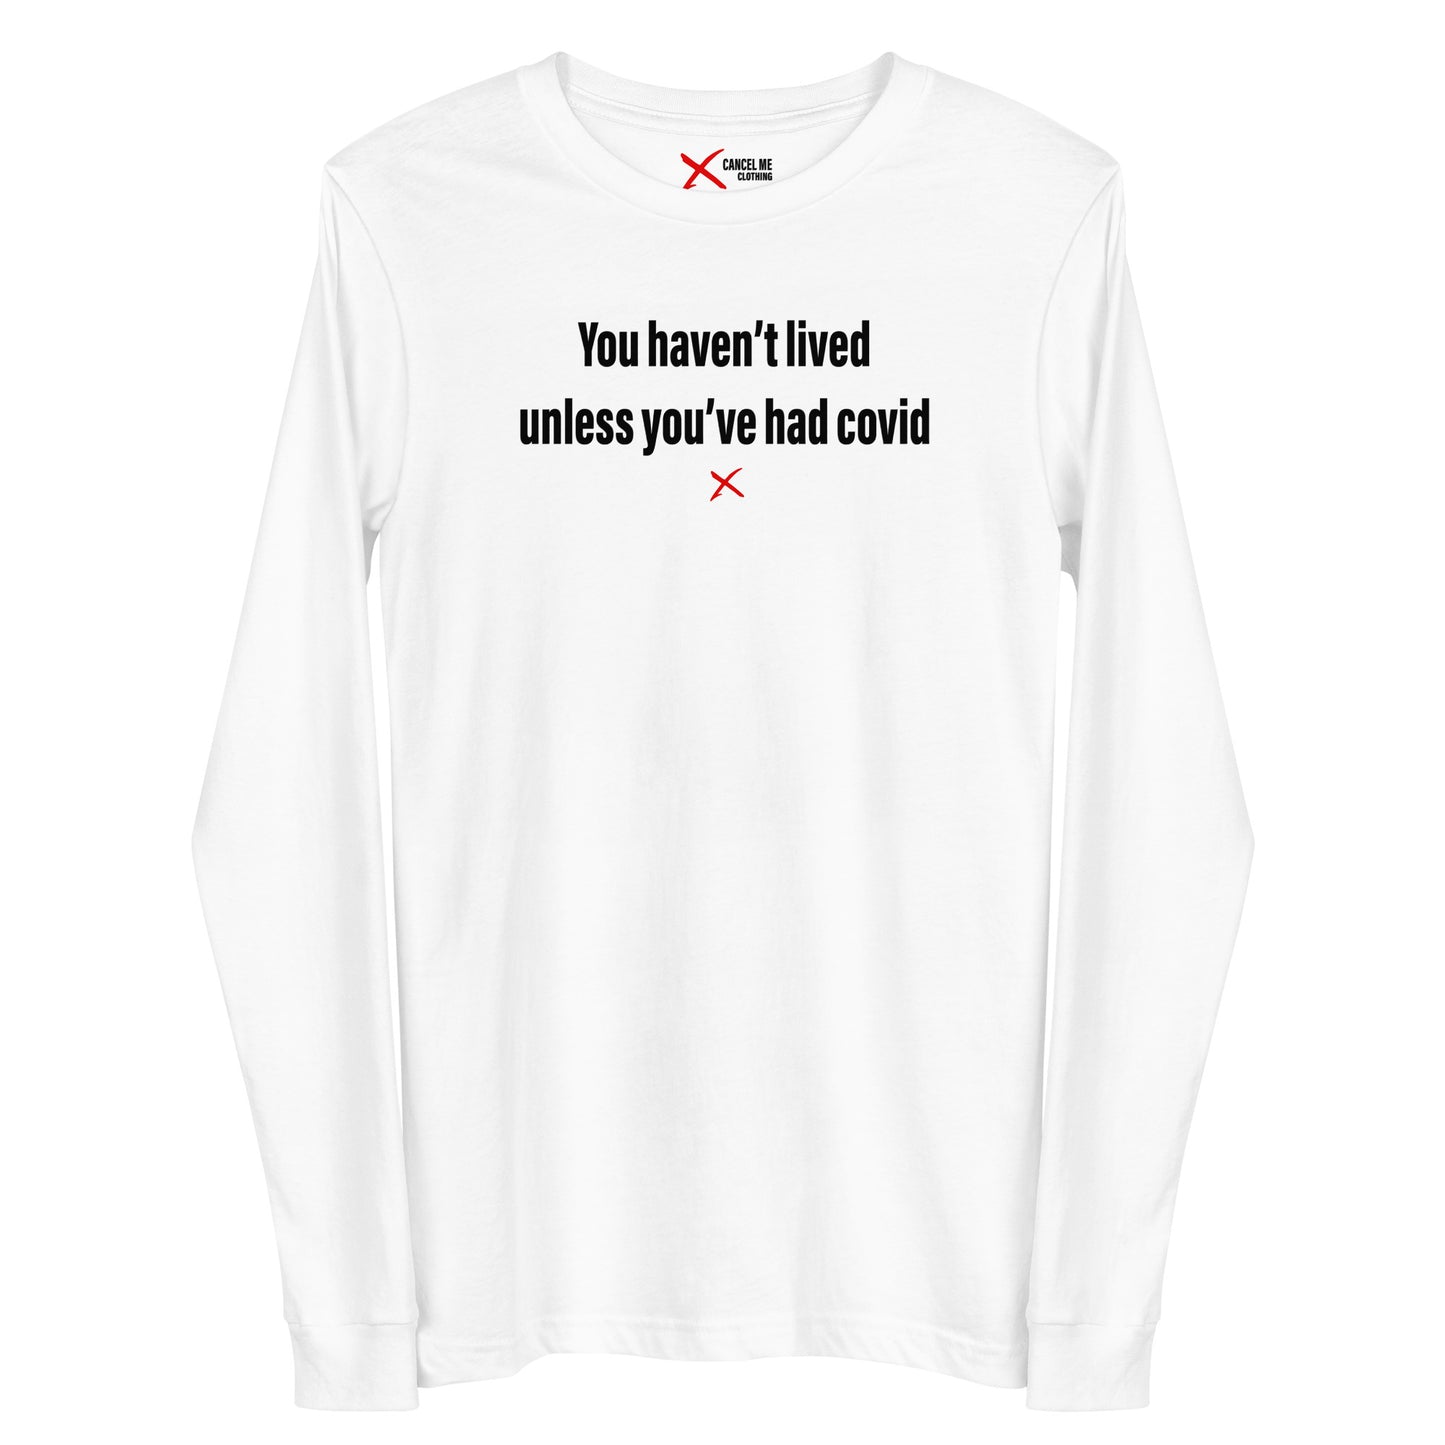 You haven't lived unless you've had covid - Longsleeve